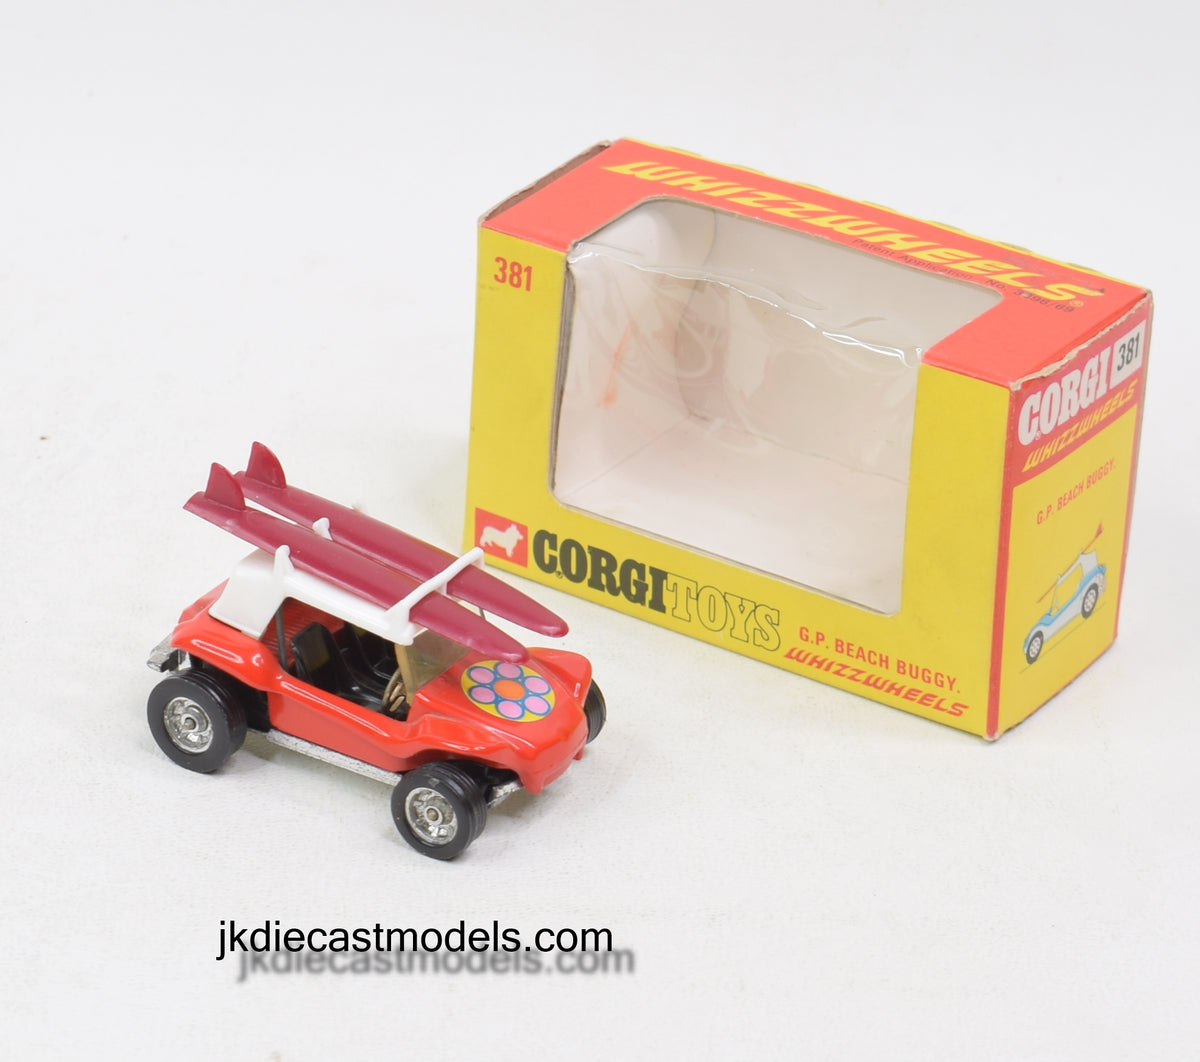 Corgi toys 381 G.P Beach Buggy Mint/Boxed (Dished hubs) 'Avonmore Collection'